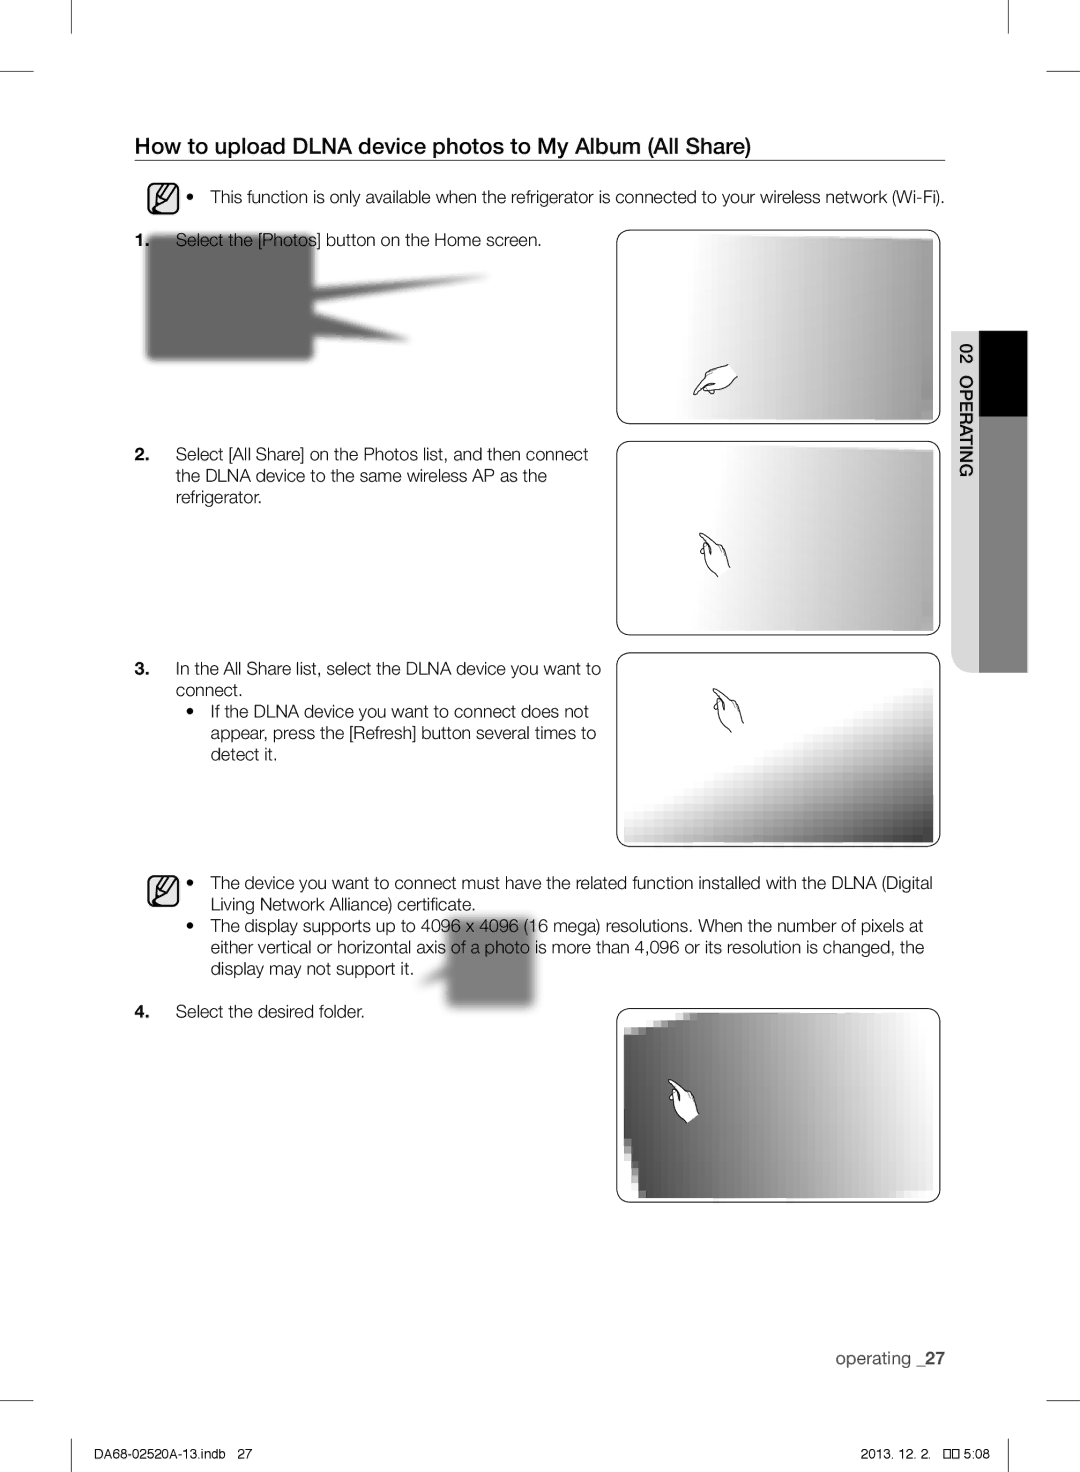 Samsung RF4289HAR user manual How to upload Dlna device photos to My Album All Share 